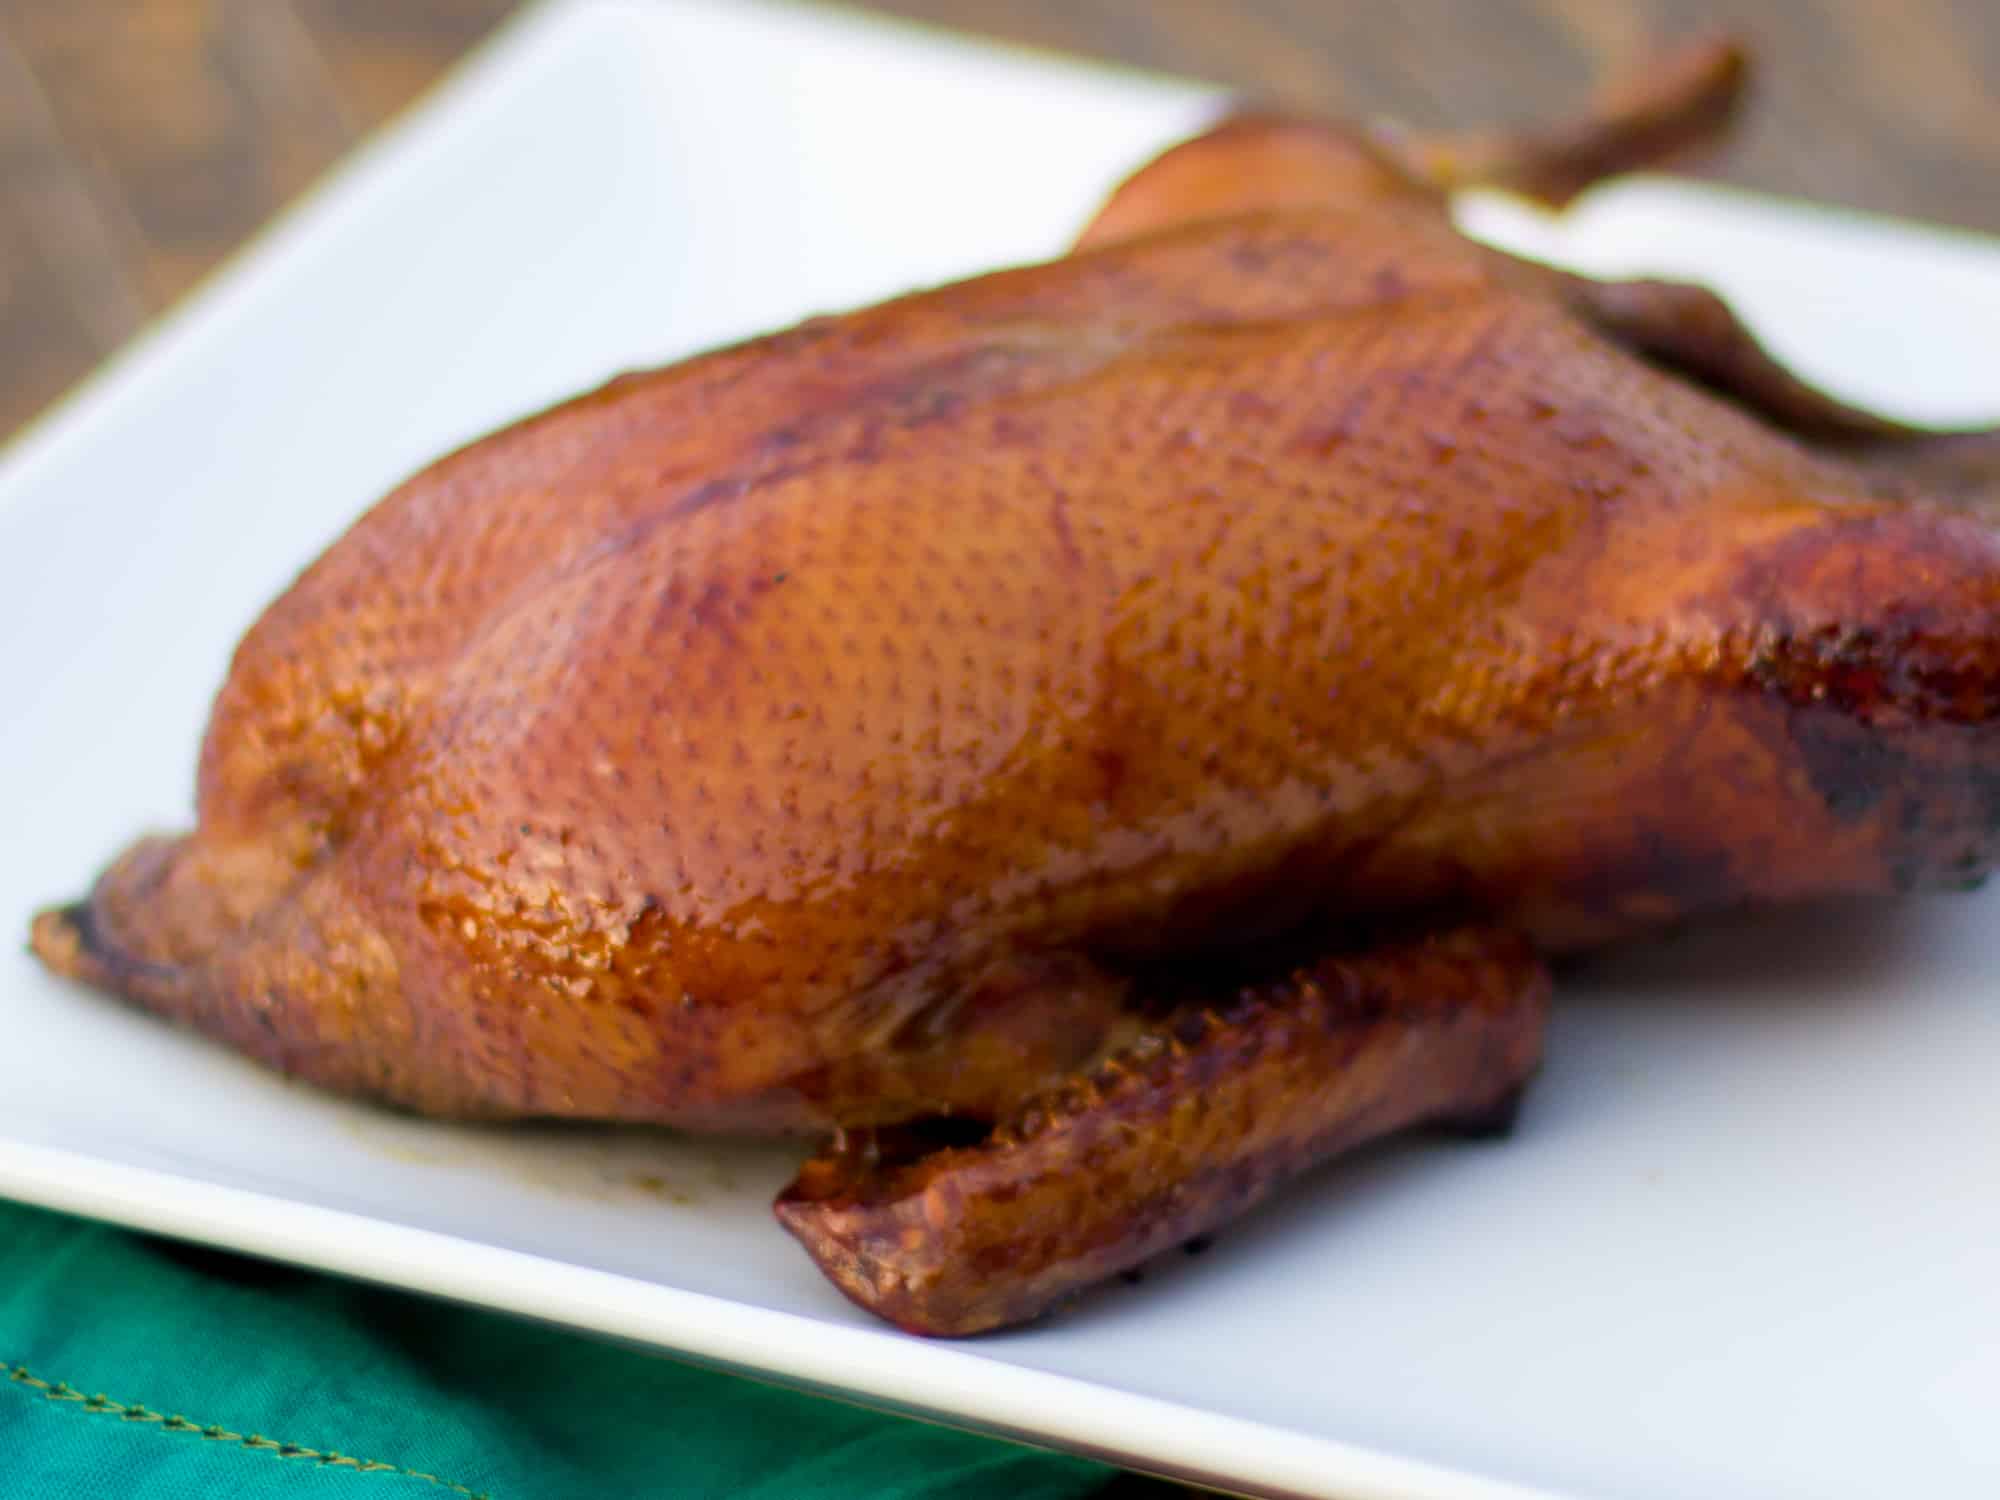 Smoked whole duck with a honey balsamic glaze with mesquite or hickory wood. 